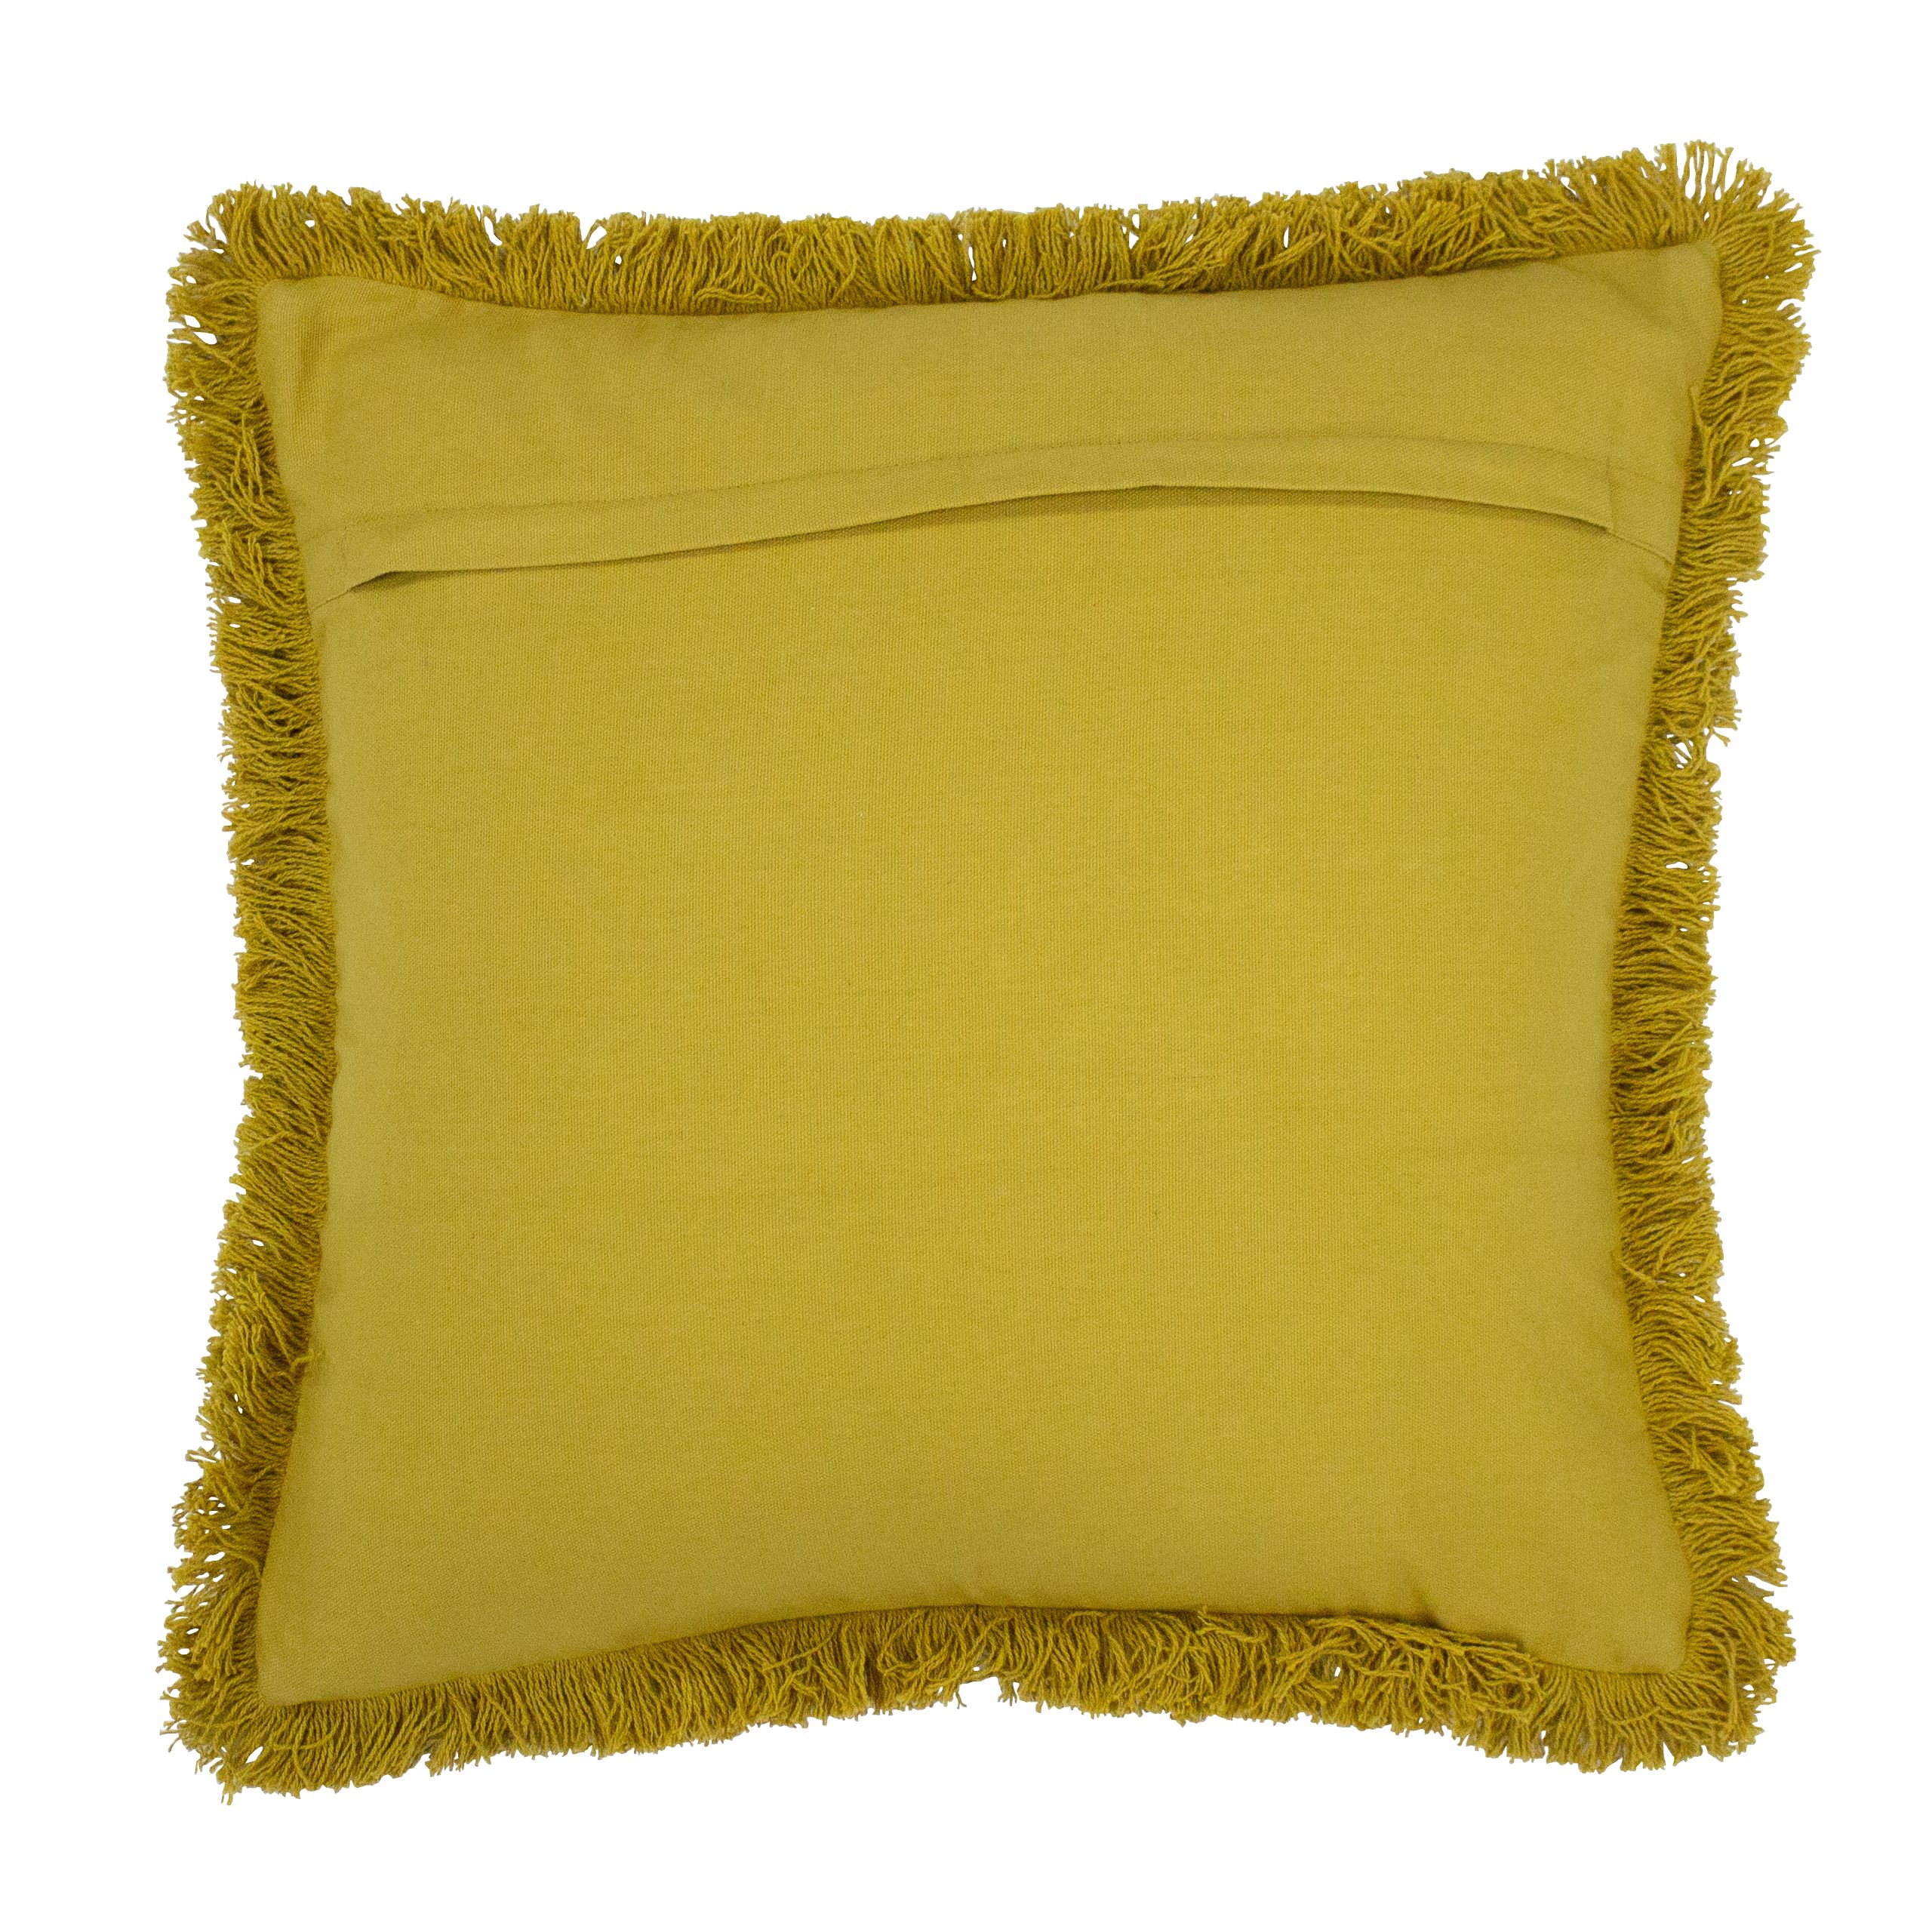 Wanting to uplift your living spaces? Add this textured fringe trimmed cushion to any contemporary or modern home for that perfect eye-catching look. Complete with twill woven stitching and a soft cotton fringe edge, this design will be a fabulous addition when moving into a spring interior for a refreshed look.